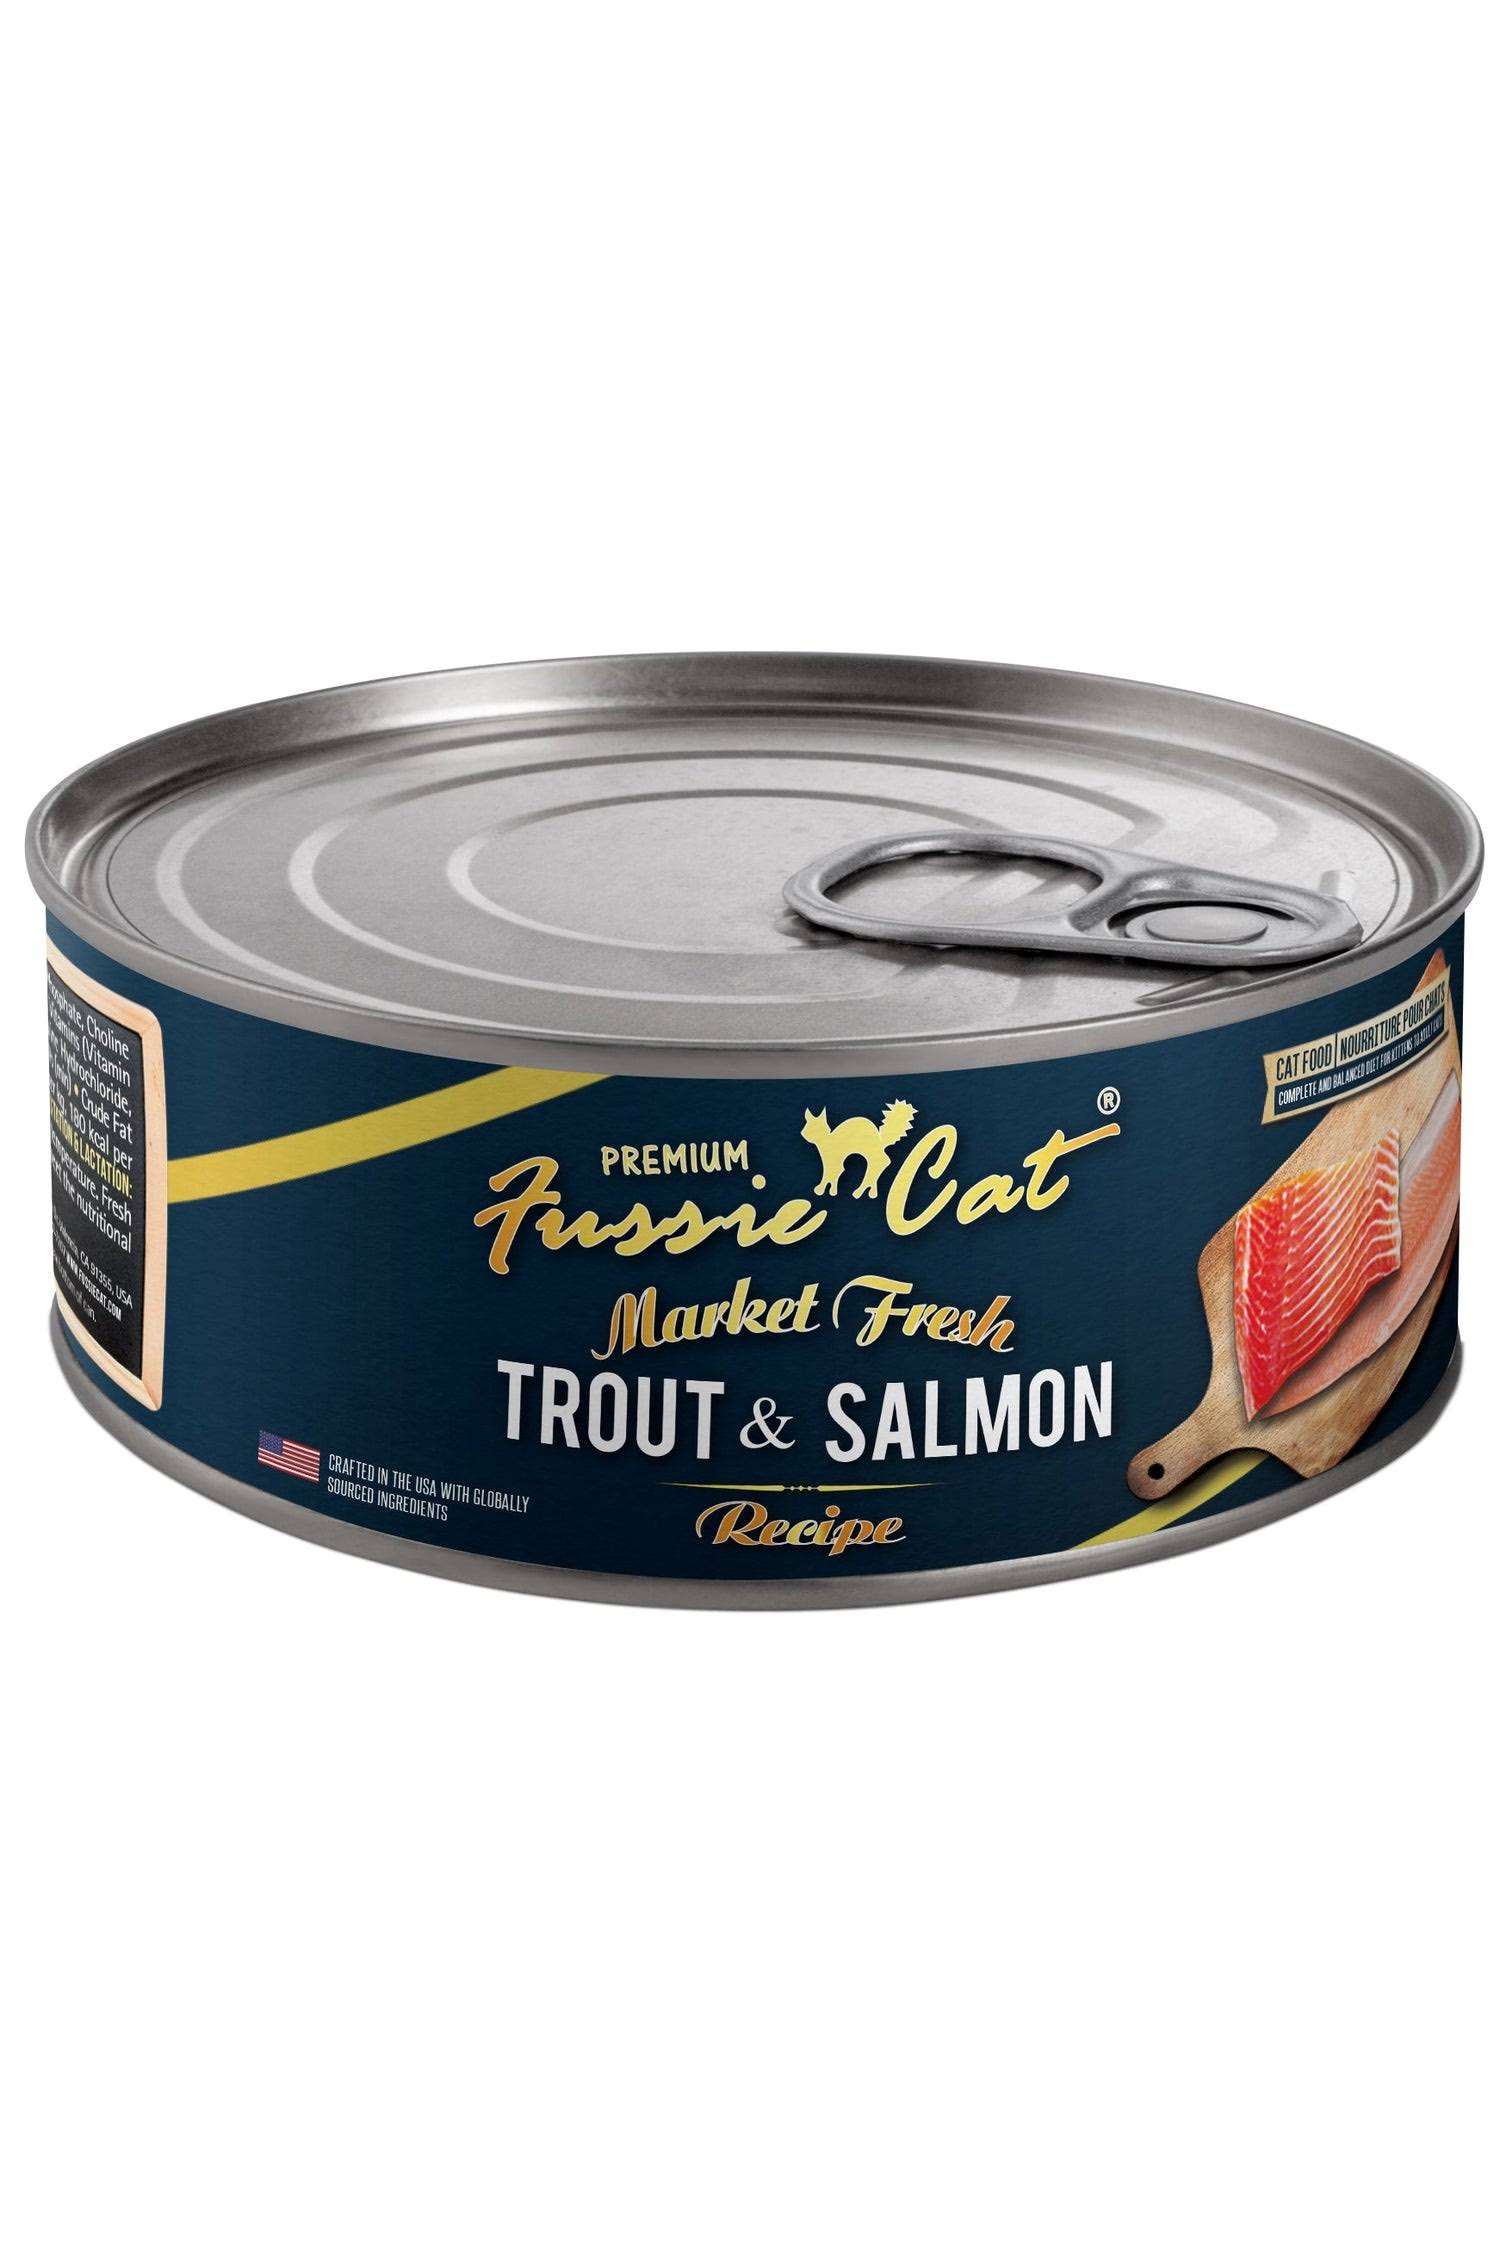 Fussie Cat Market Fresh Trout & Salmon Canned Cat Food, 5.5 oz